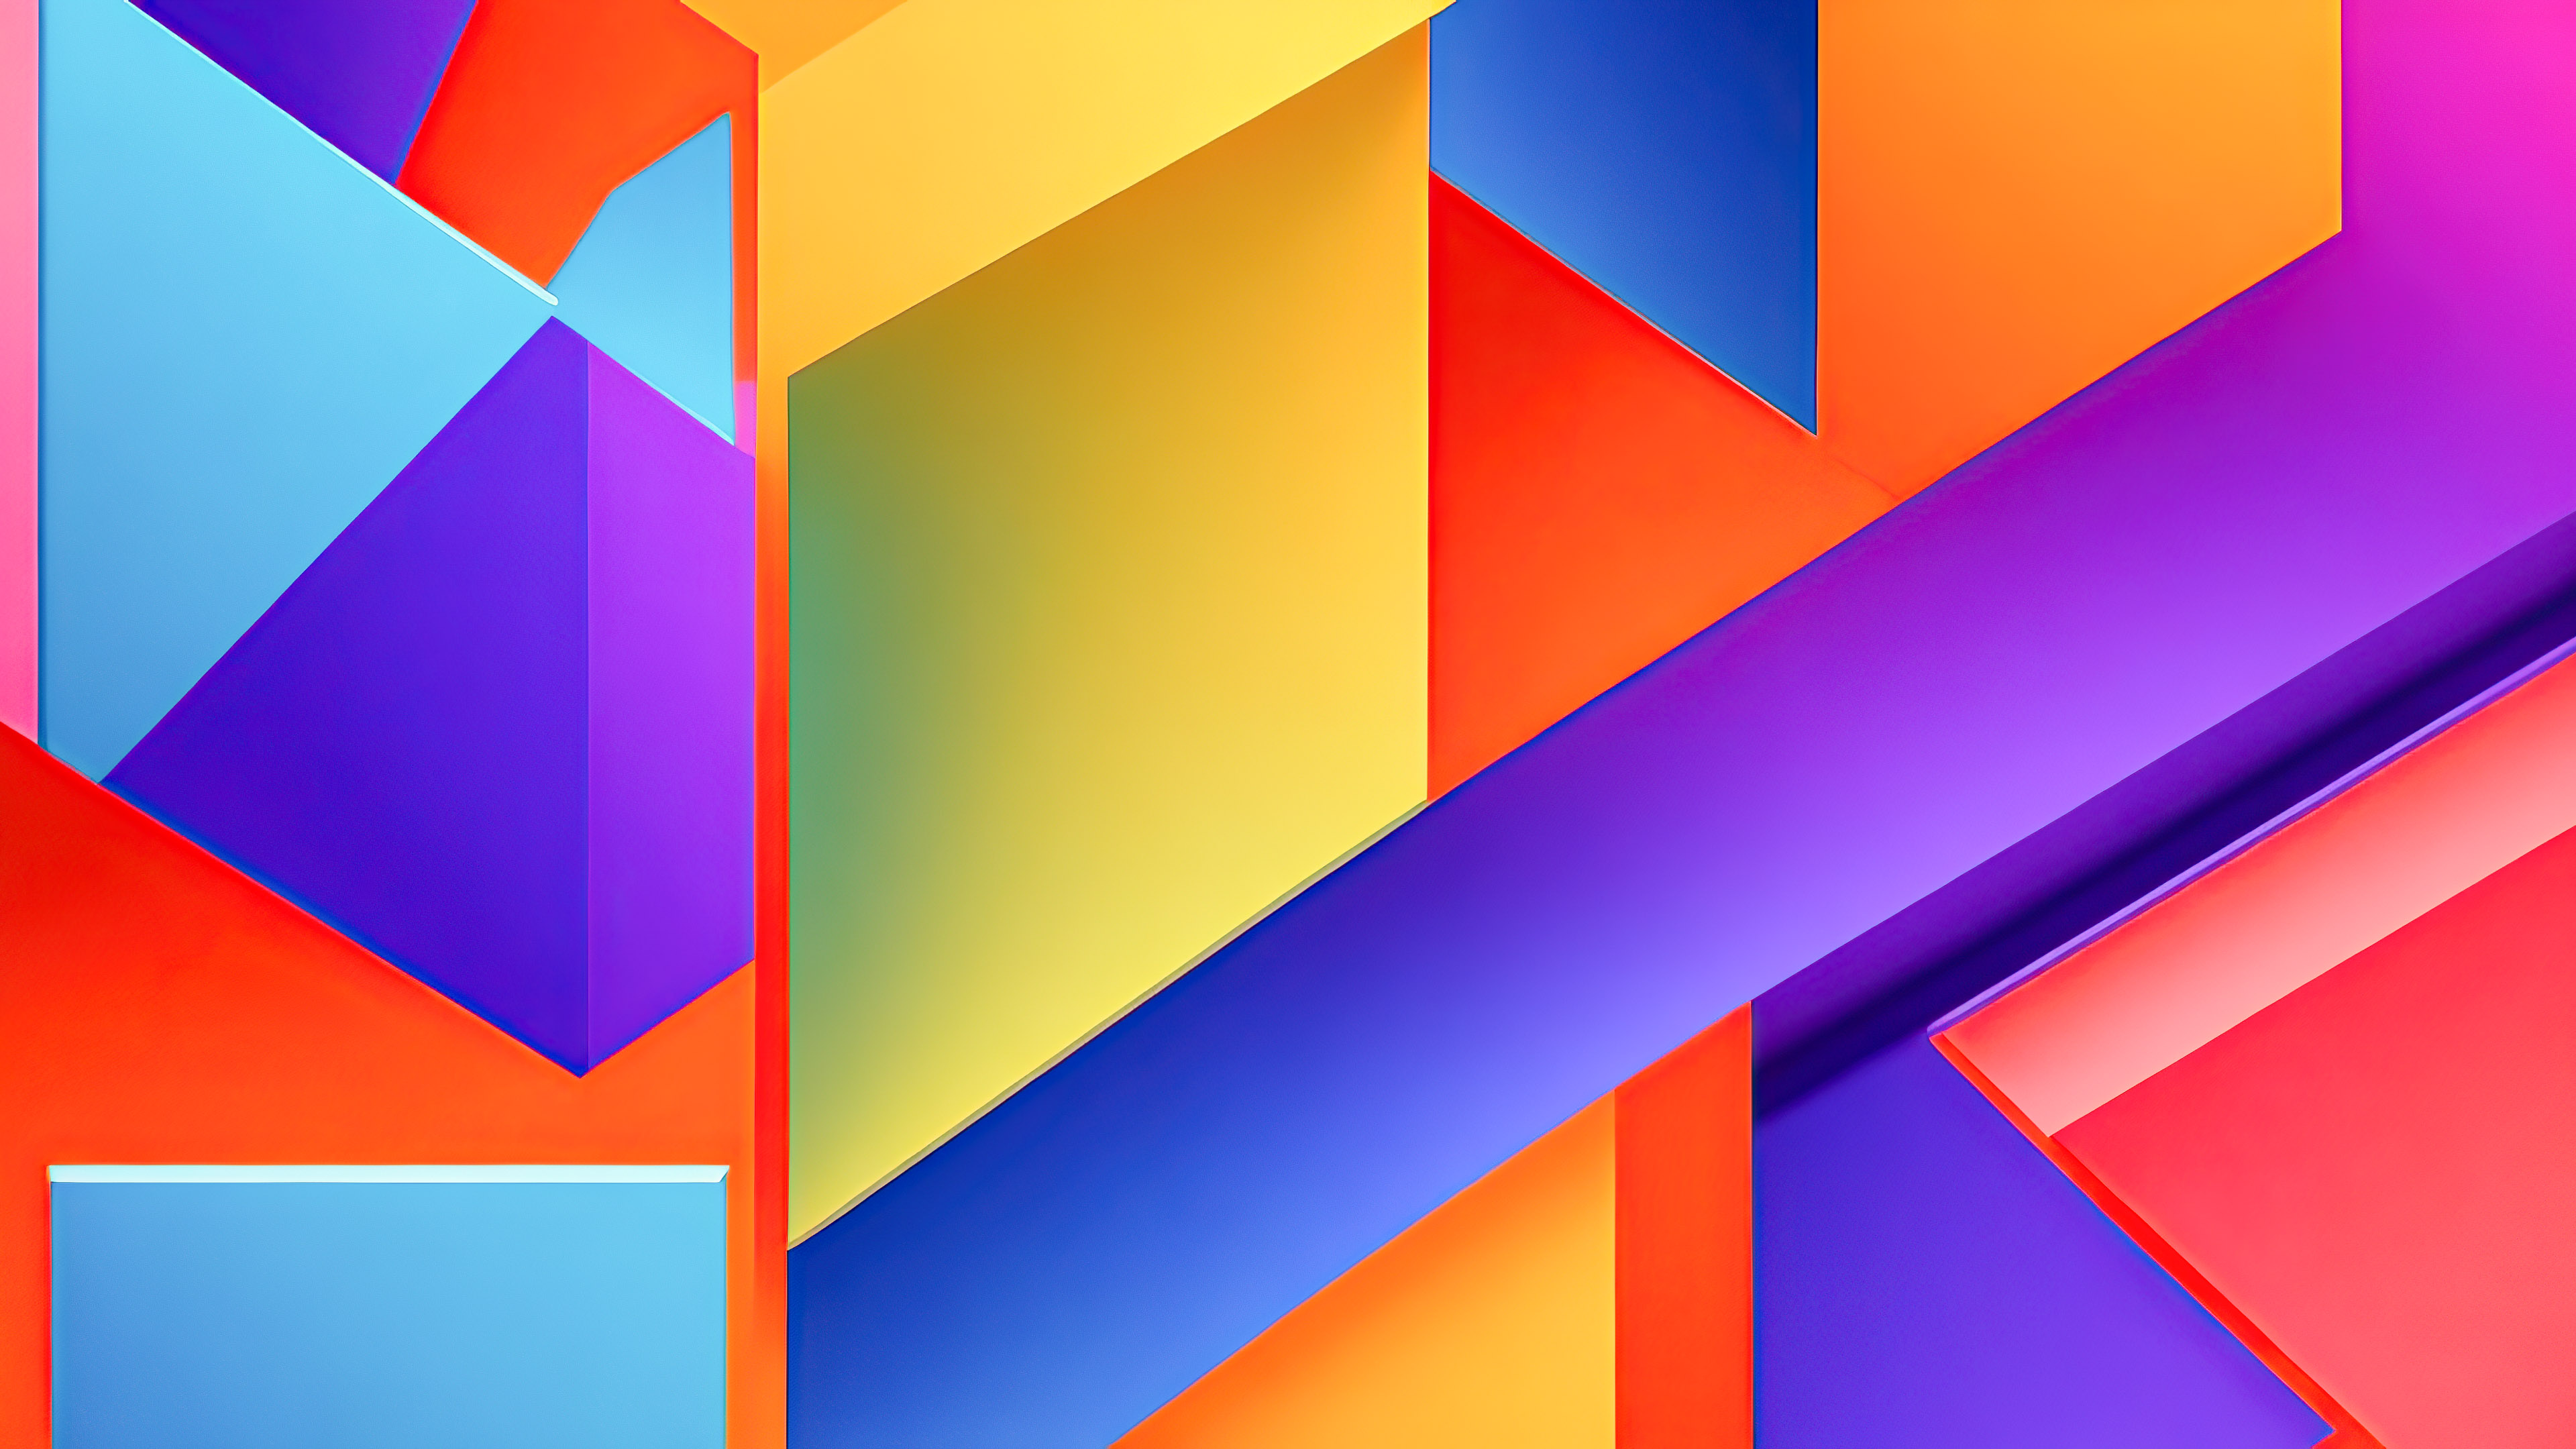 Create a visually striking desktop with our abstract desktop wallpaper, showcasing simple colorful geometric shapes on a vibrant background.